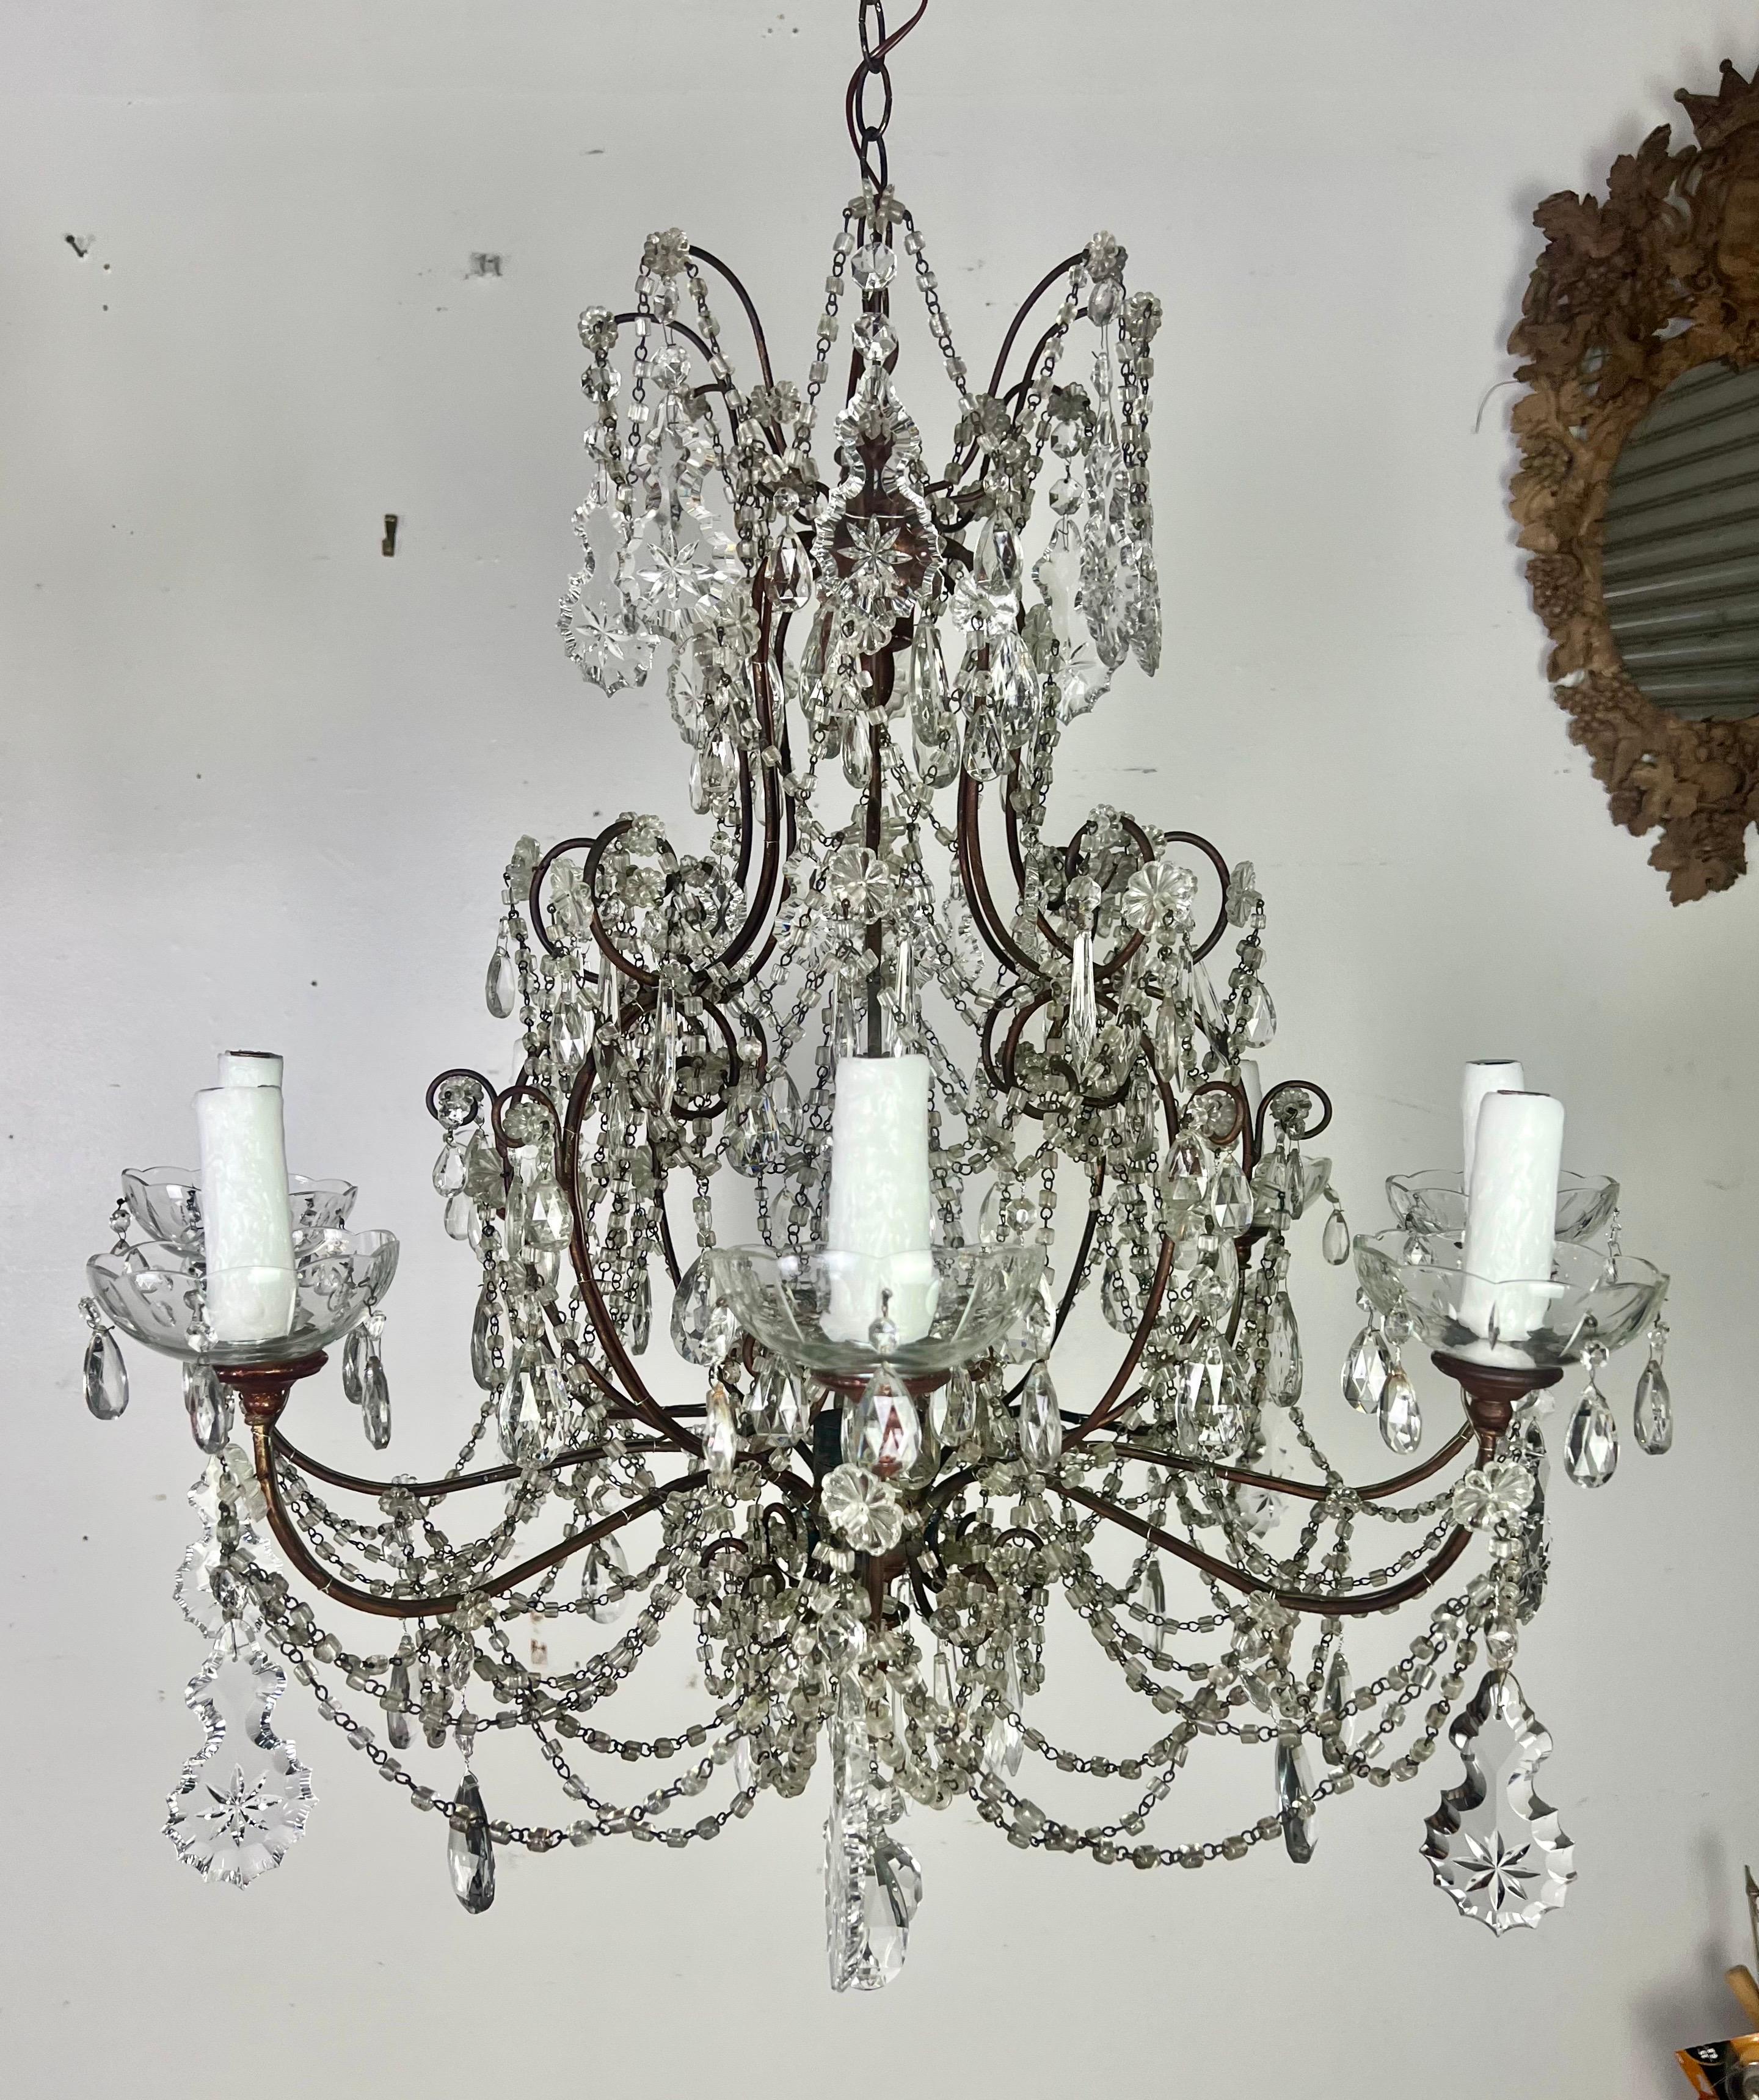 Pair of French 8-light crystal chandeliers featuring star-etched crystals and garlands of macaroni beads, giving them a unique and opulent look.  The use of a crystal finial in the center, along with gilt wood bobeches, adds to their elegant and